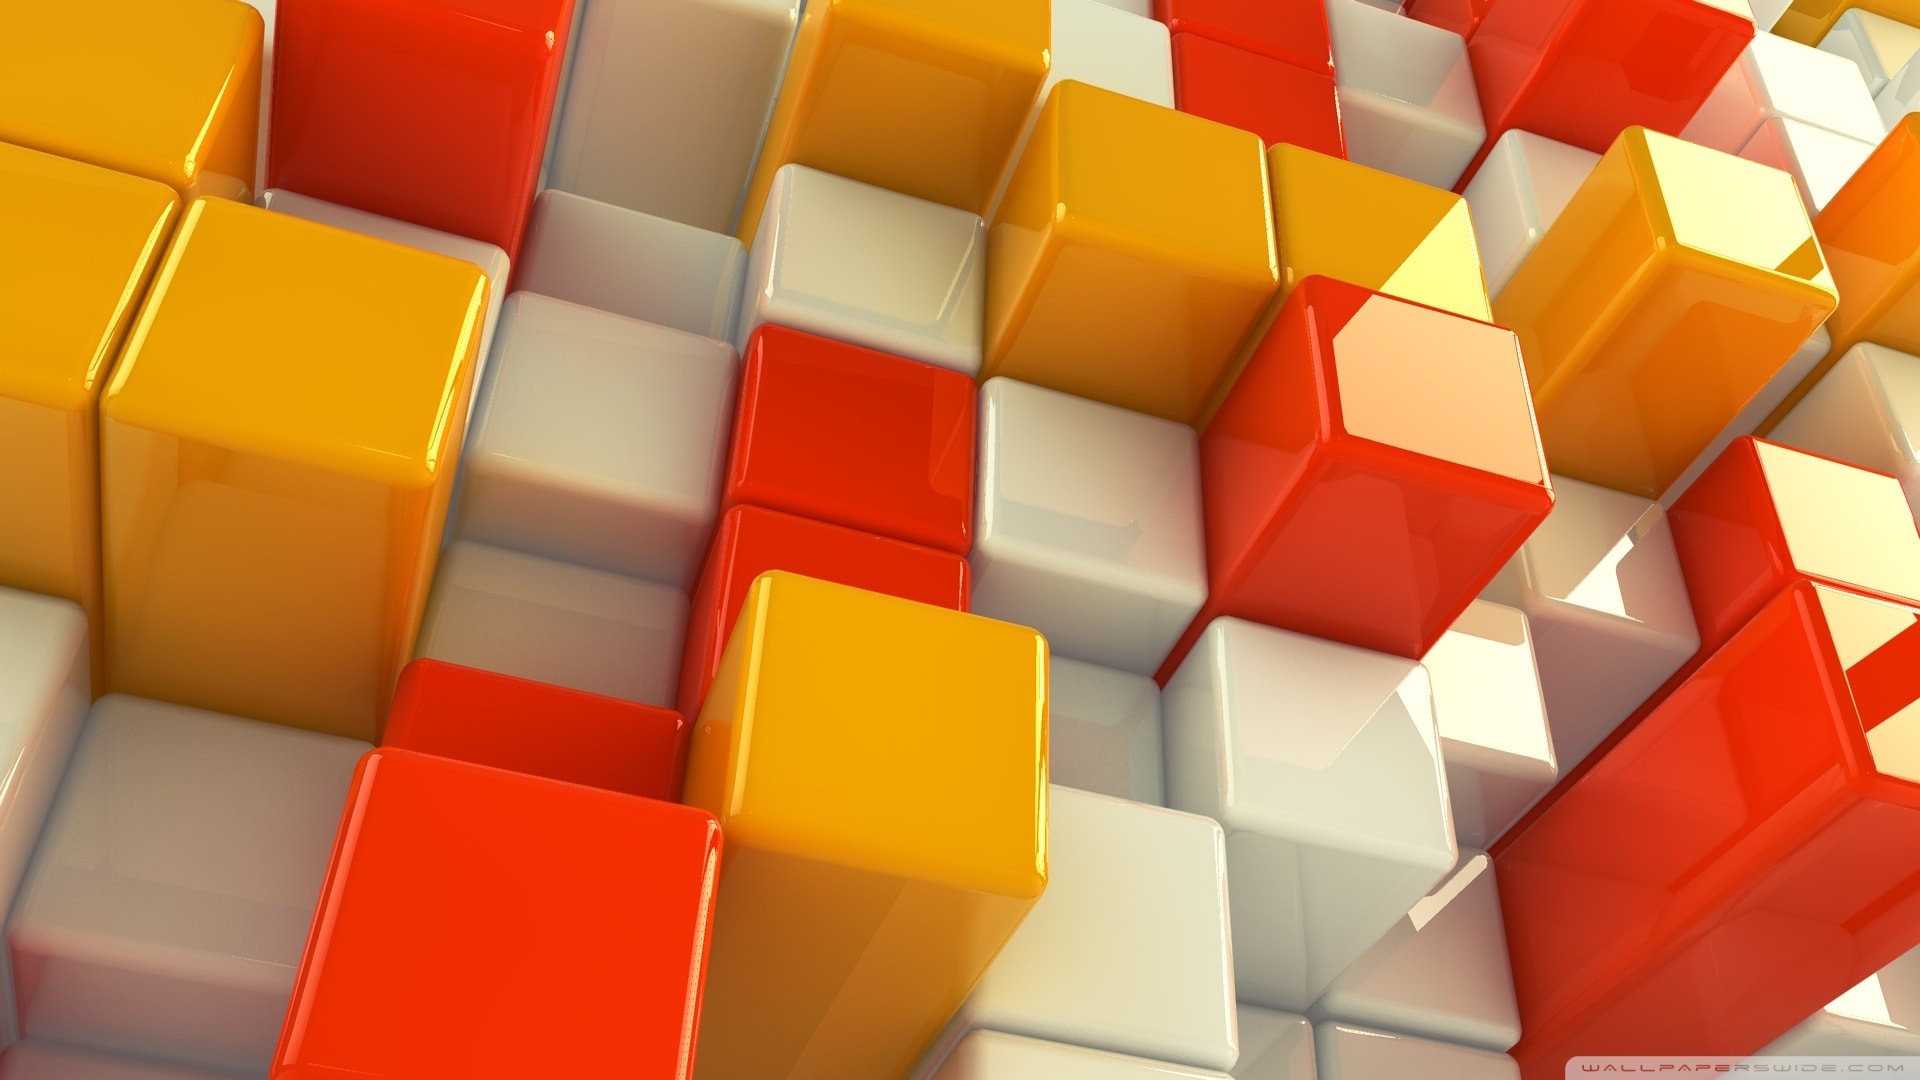 1920x1080 3d abstract yellow orange white cubes